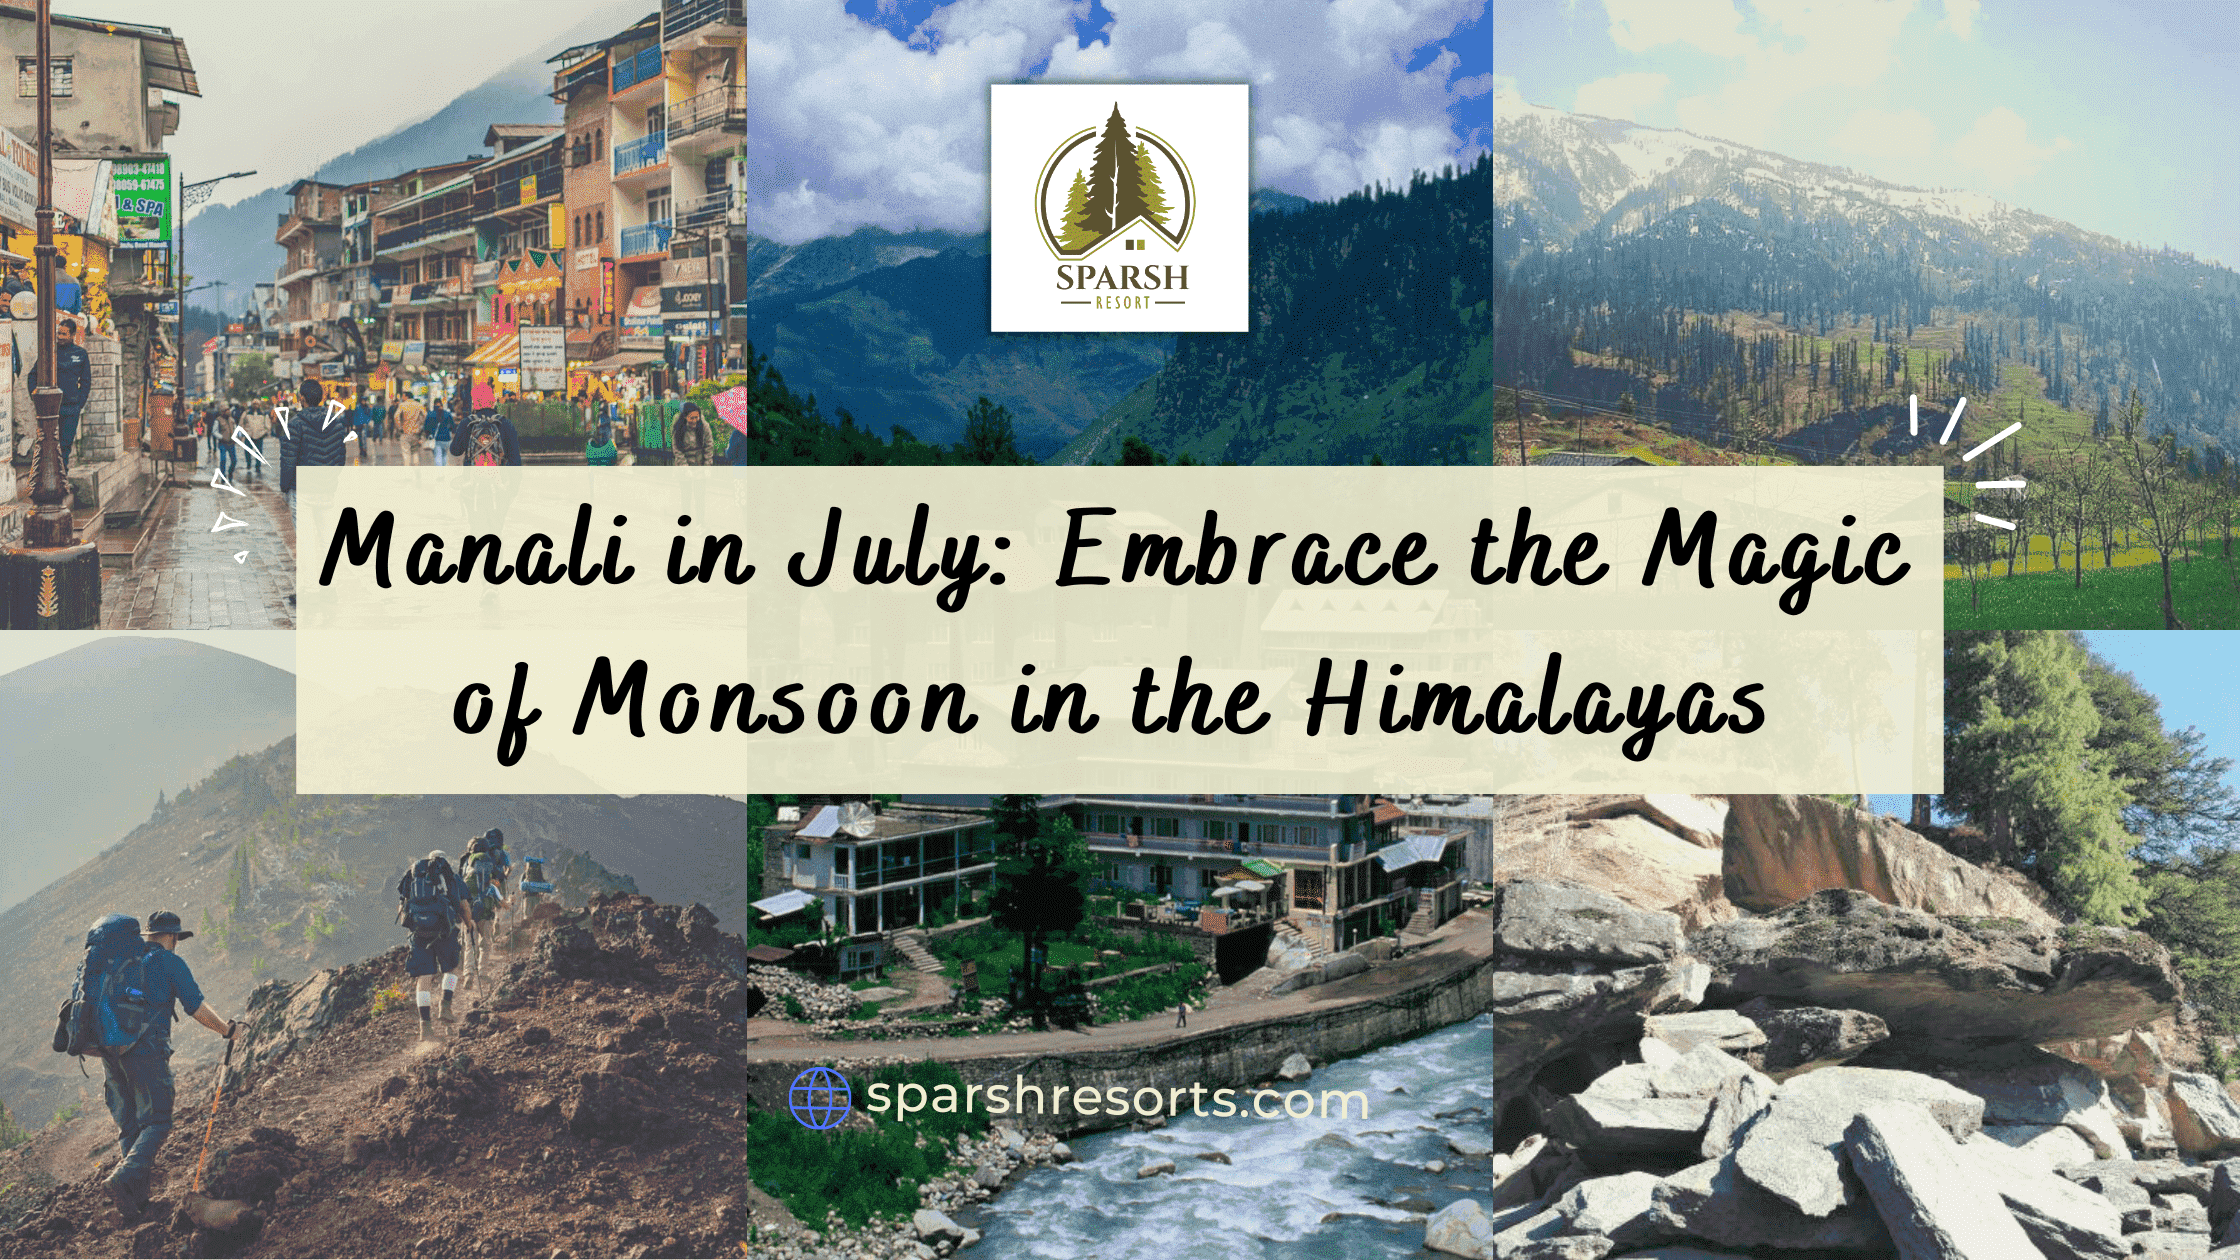 Manali in July Embrace the Magic of Monsoon in the Himalayas, Sparsh Resort Manali